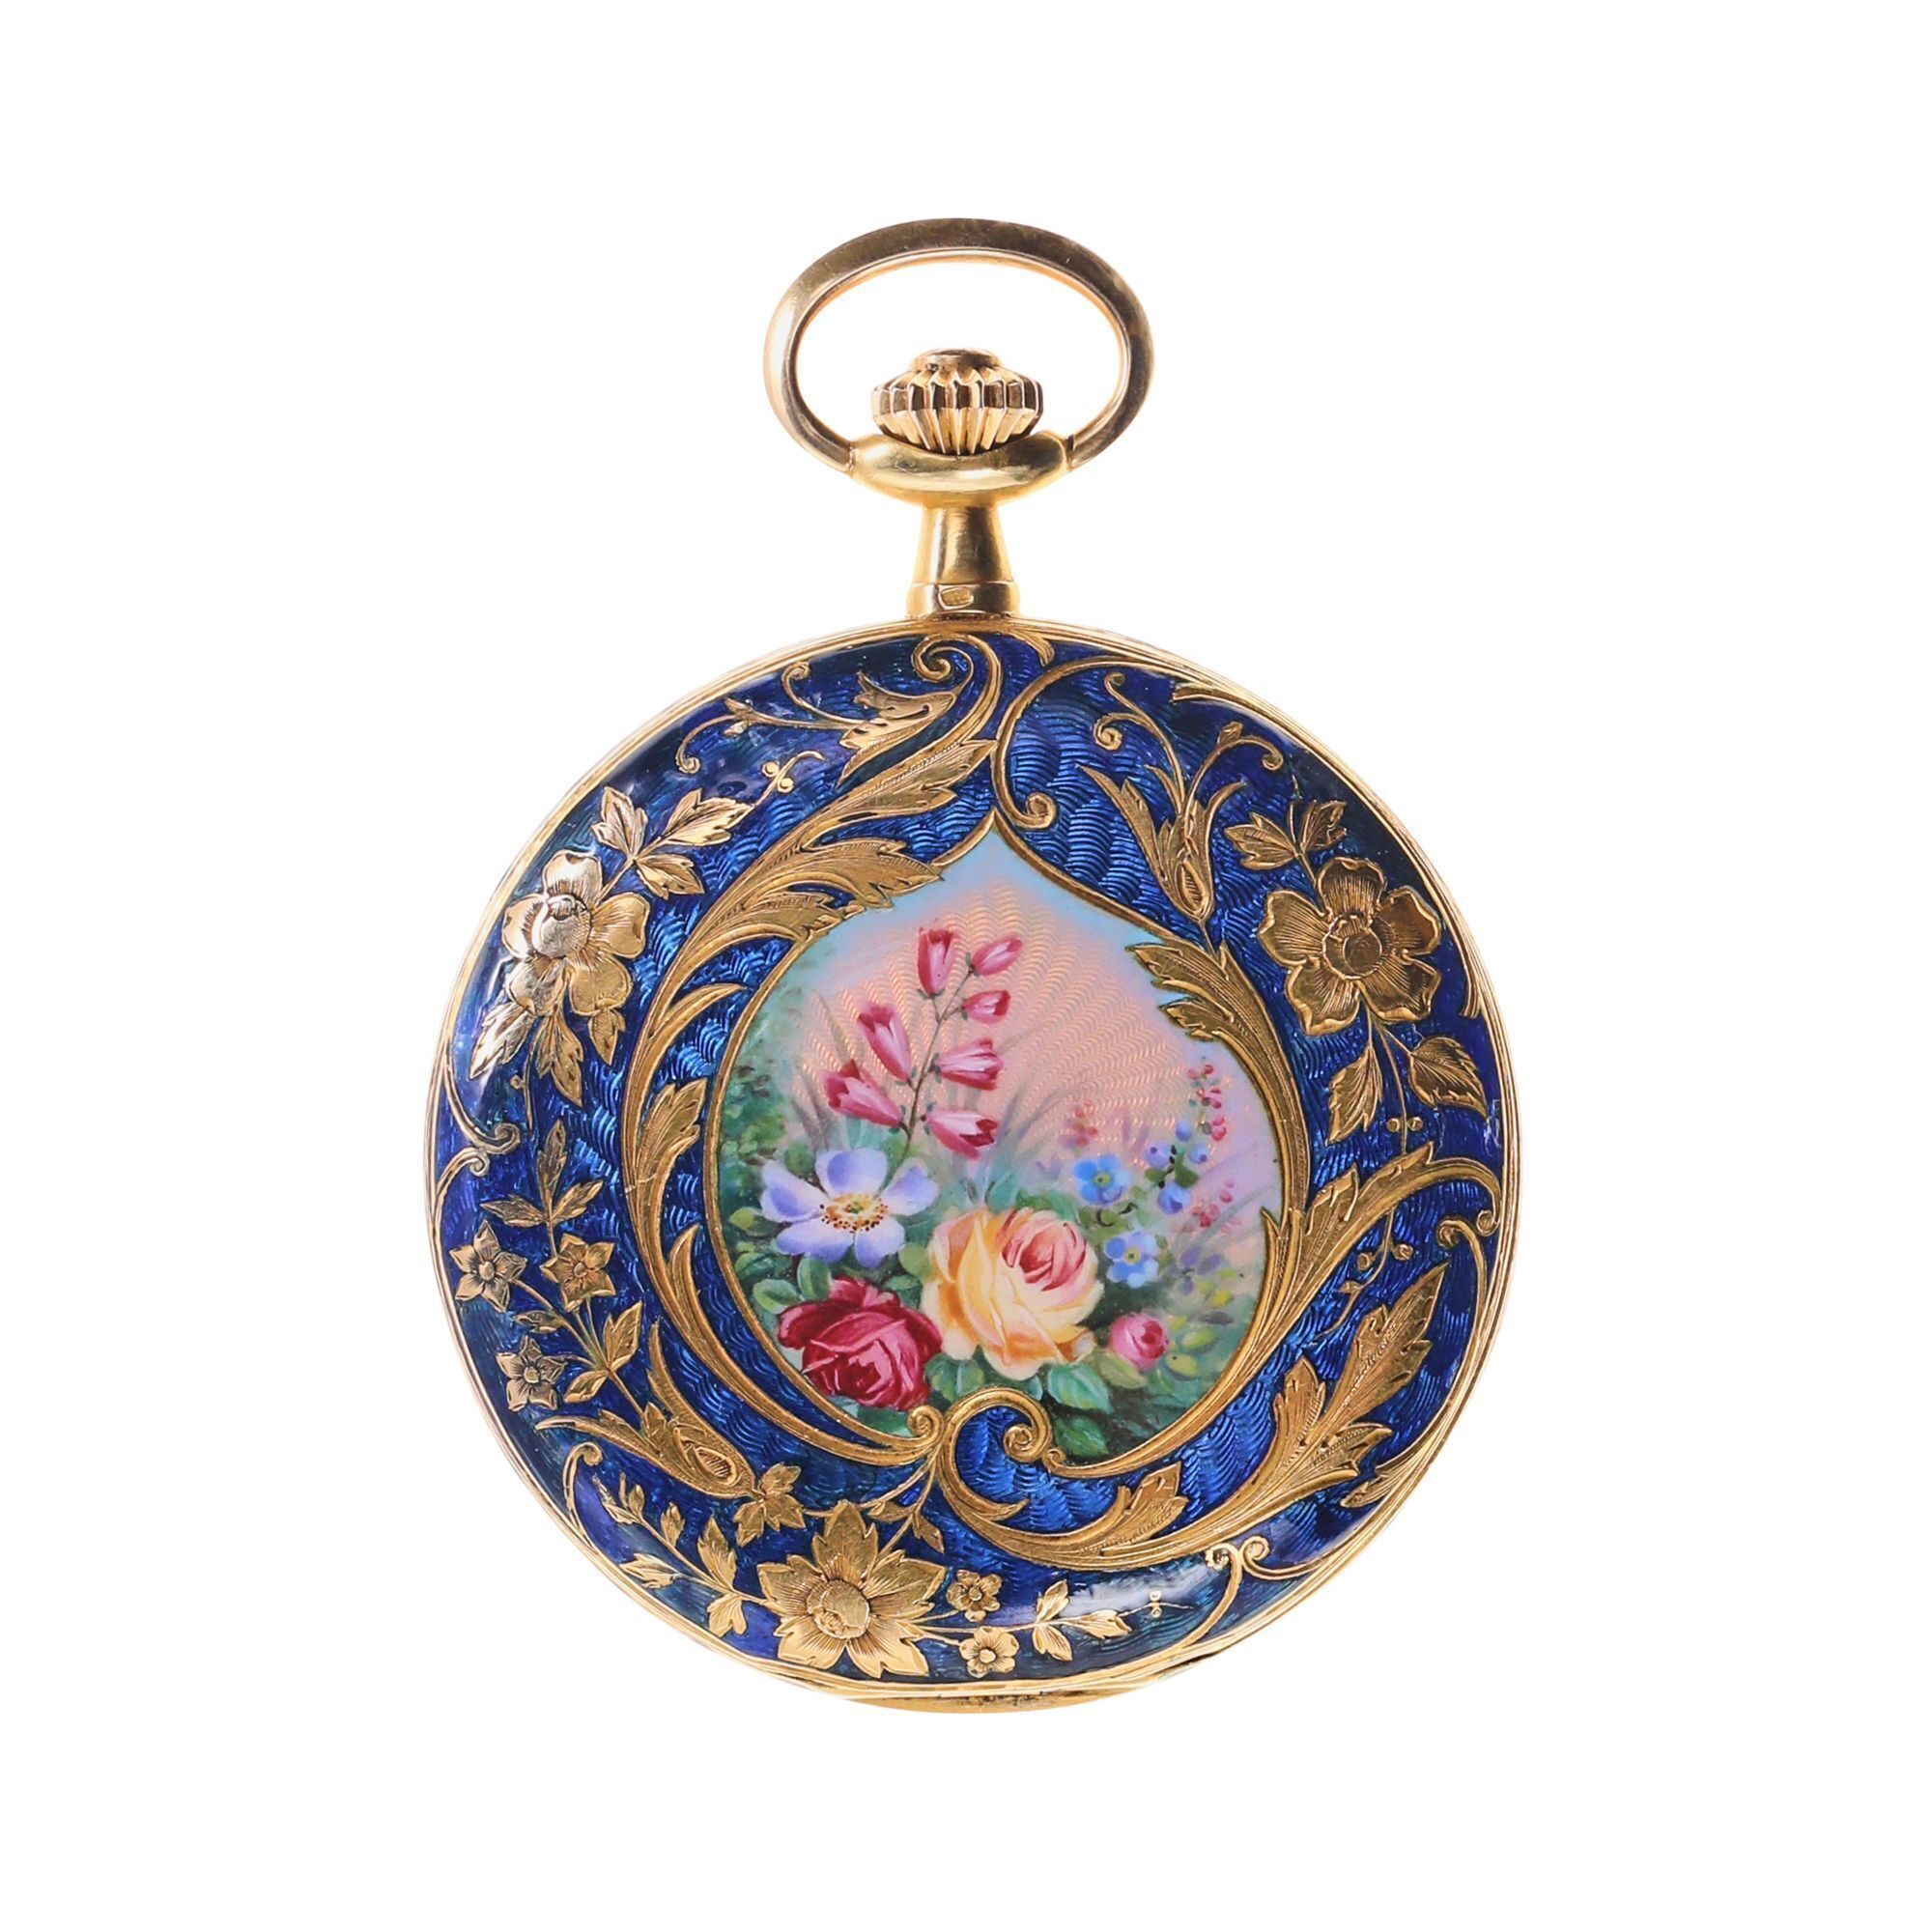 18K Yellow Gold and Multicolor Enamel Hunting Case Pocket Watch Signed Invicta